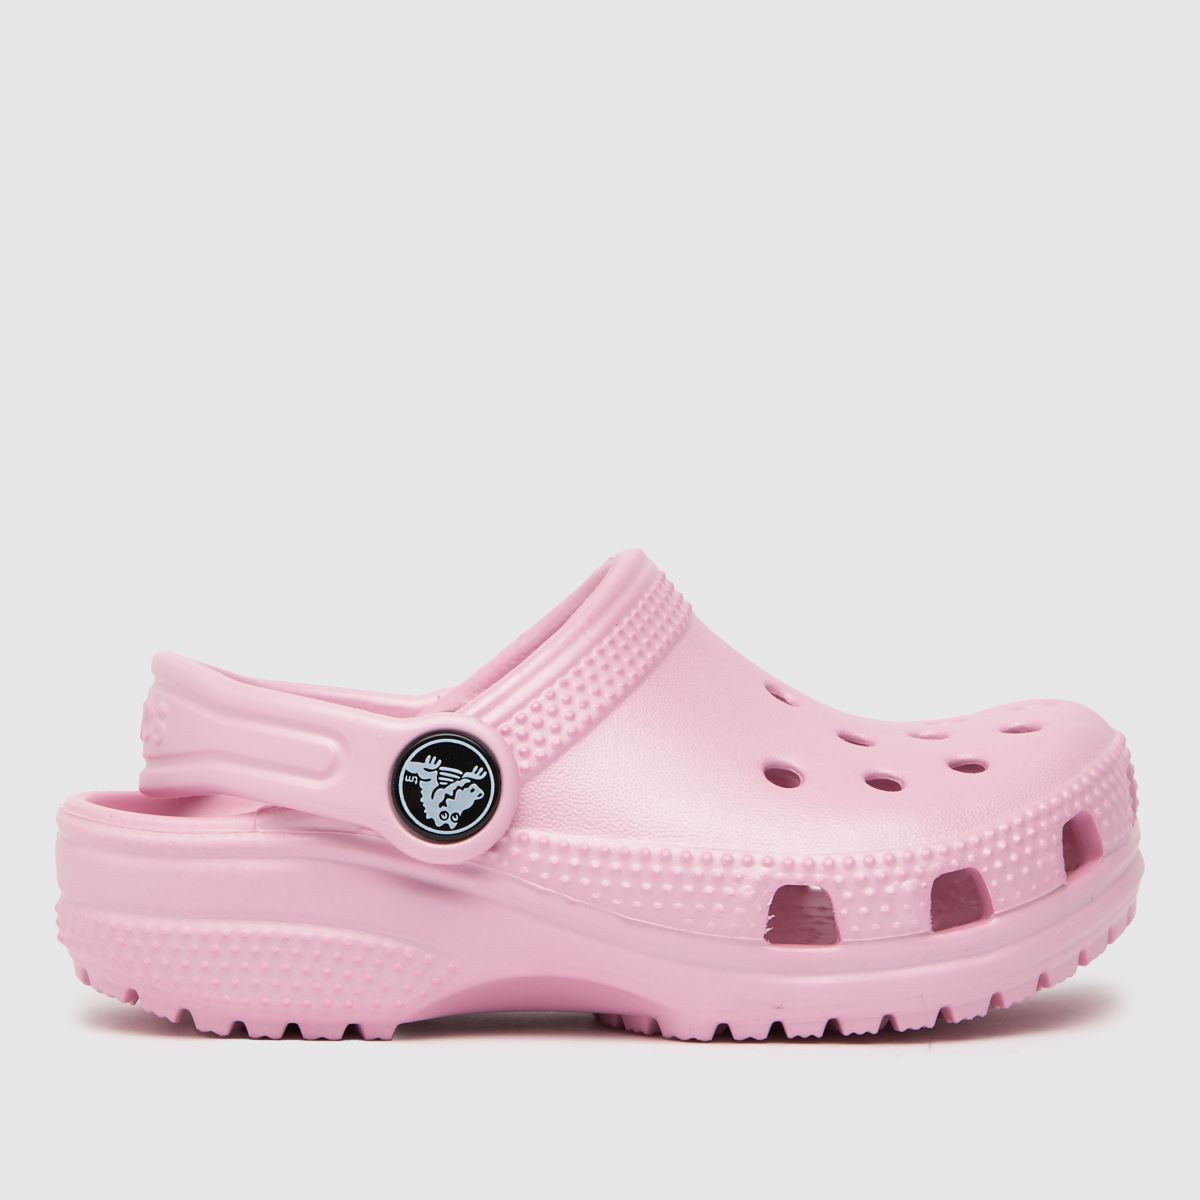 Trending product as crocodile shoes